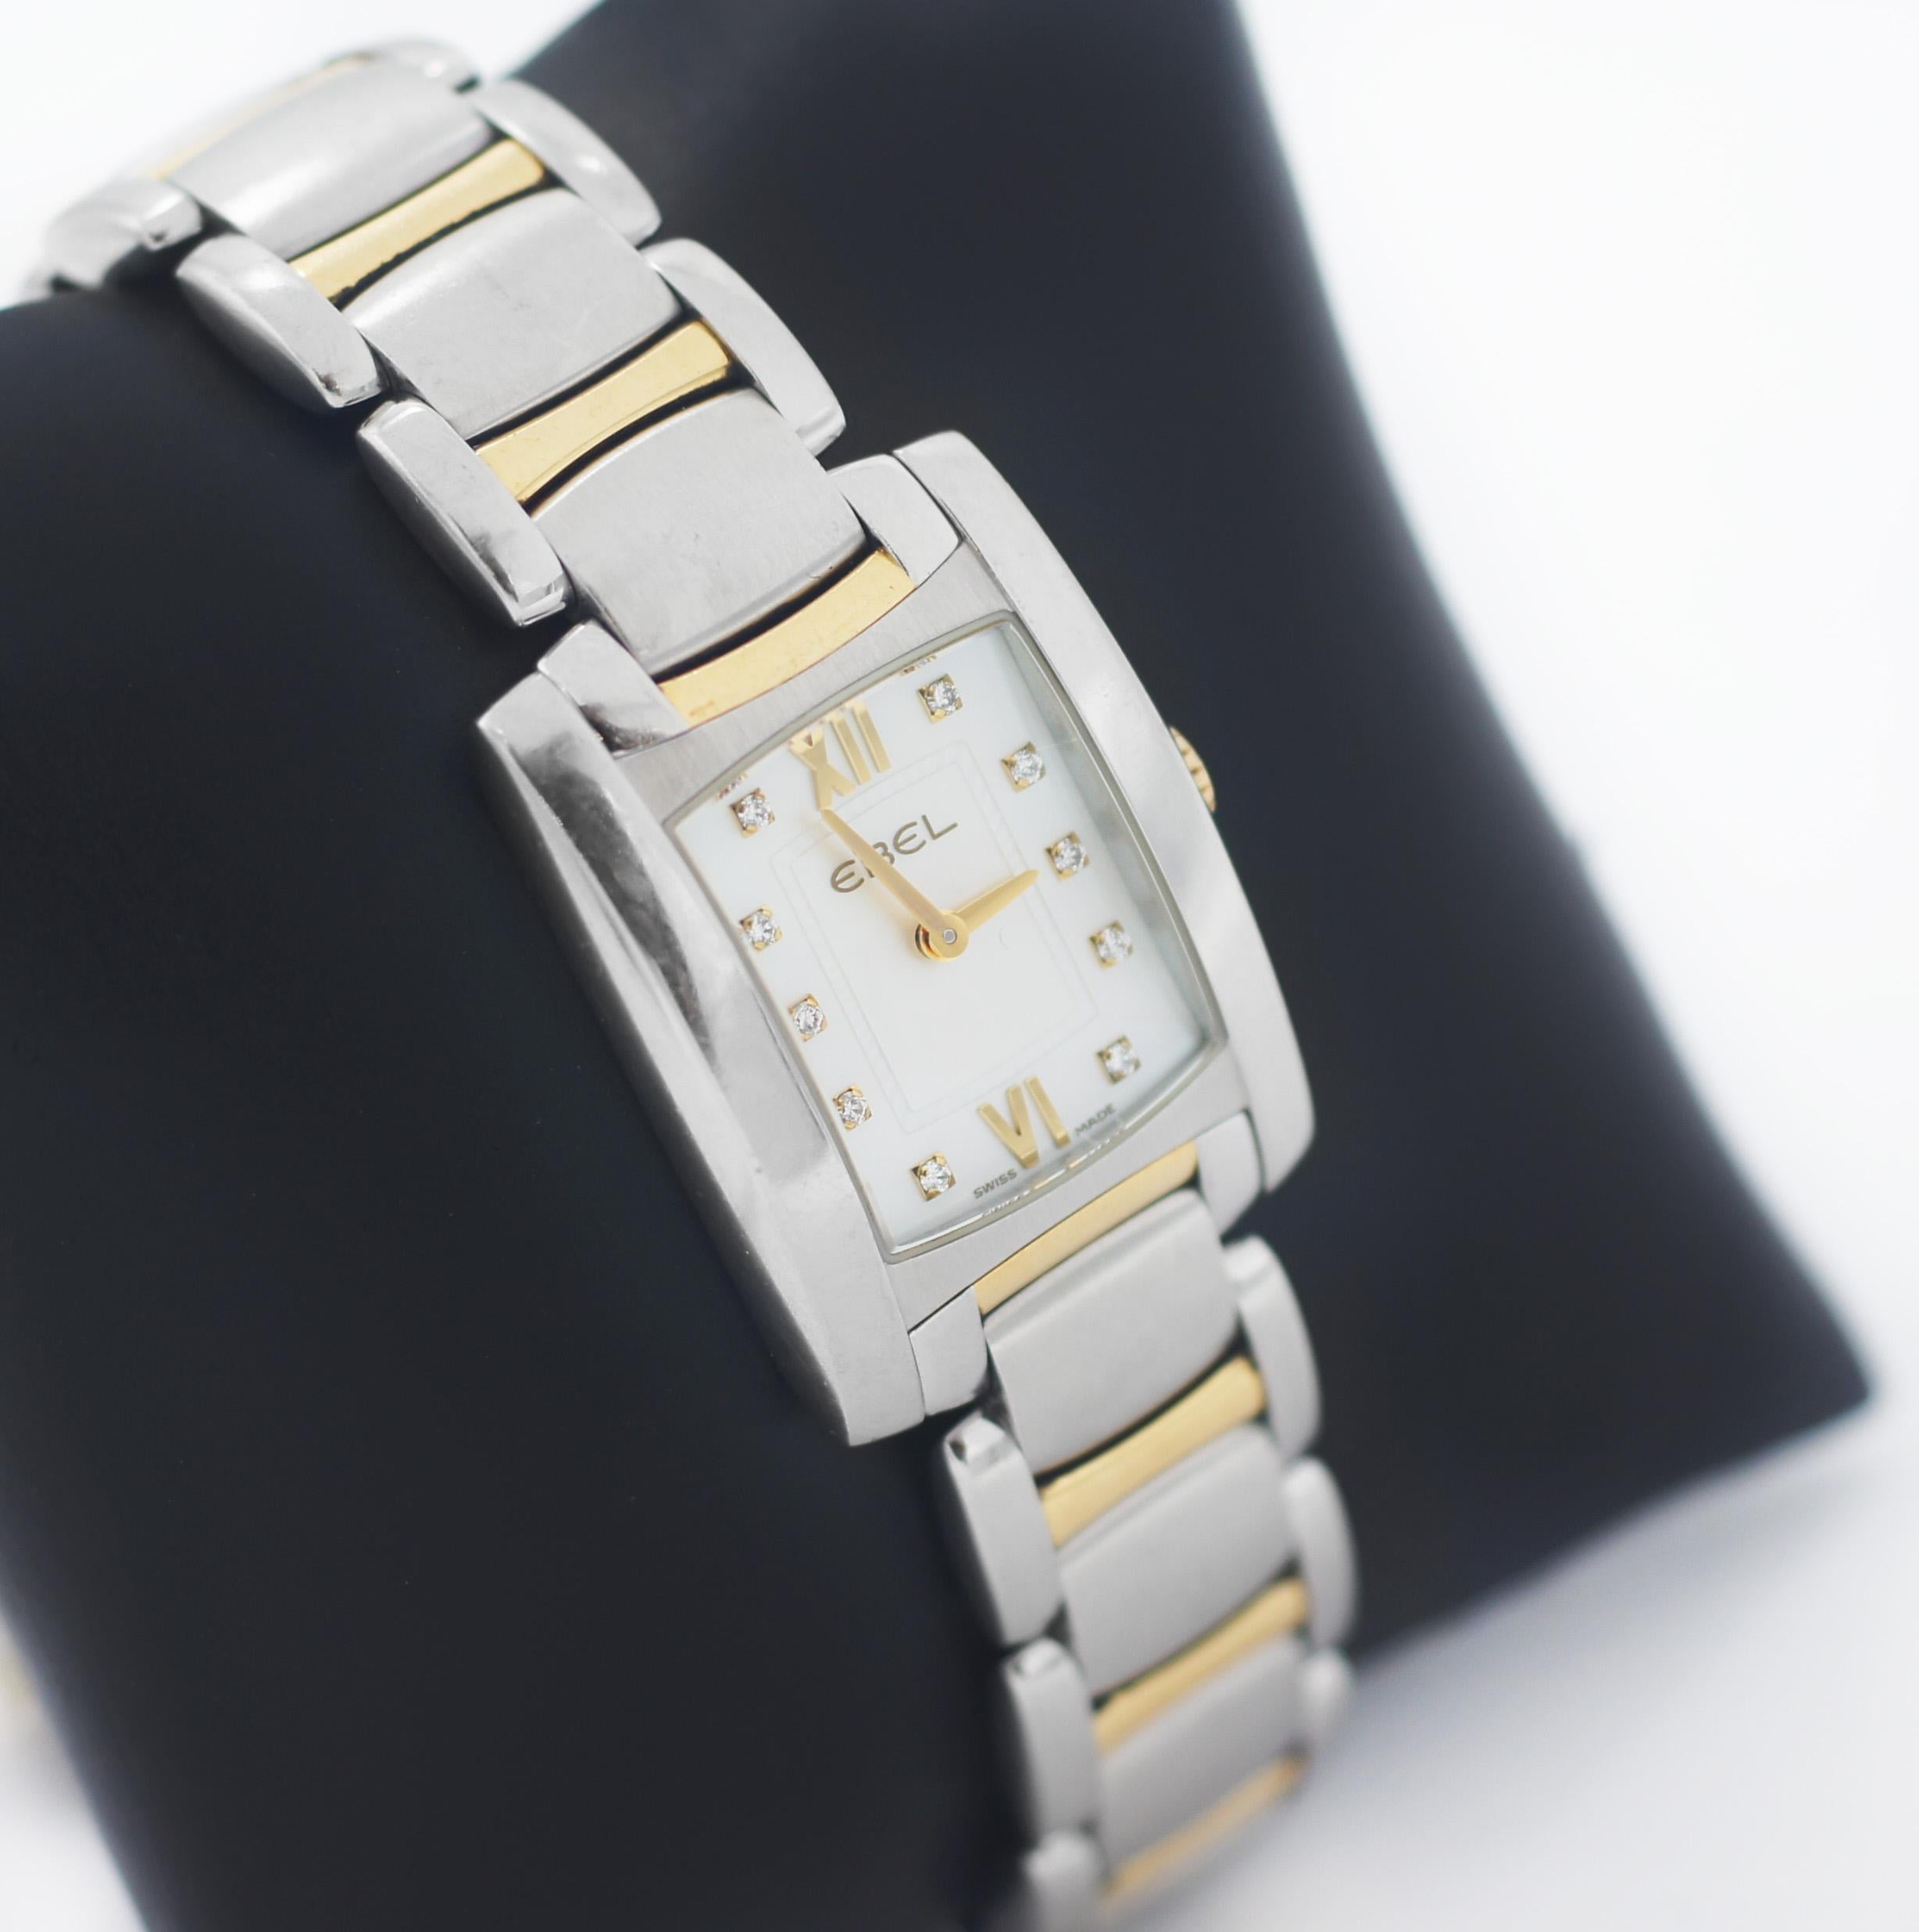 EBEL
Brasilia
Mini
Case Stainless Steel Rectangle
Approx. Case Dimensions 27mm X 30mm
Watch Material: Stainless Steel & Gold
Dial Color: Mother of Pearl with 10 Diamond markers
Gold hands and Roman numerals mark the 6 and 12 o'clock